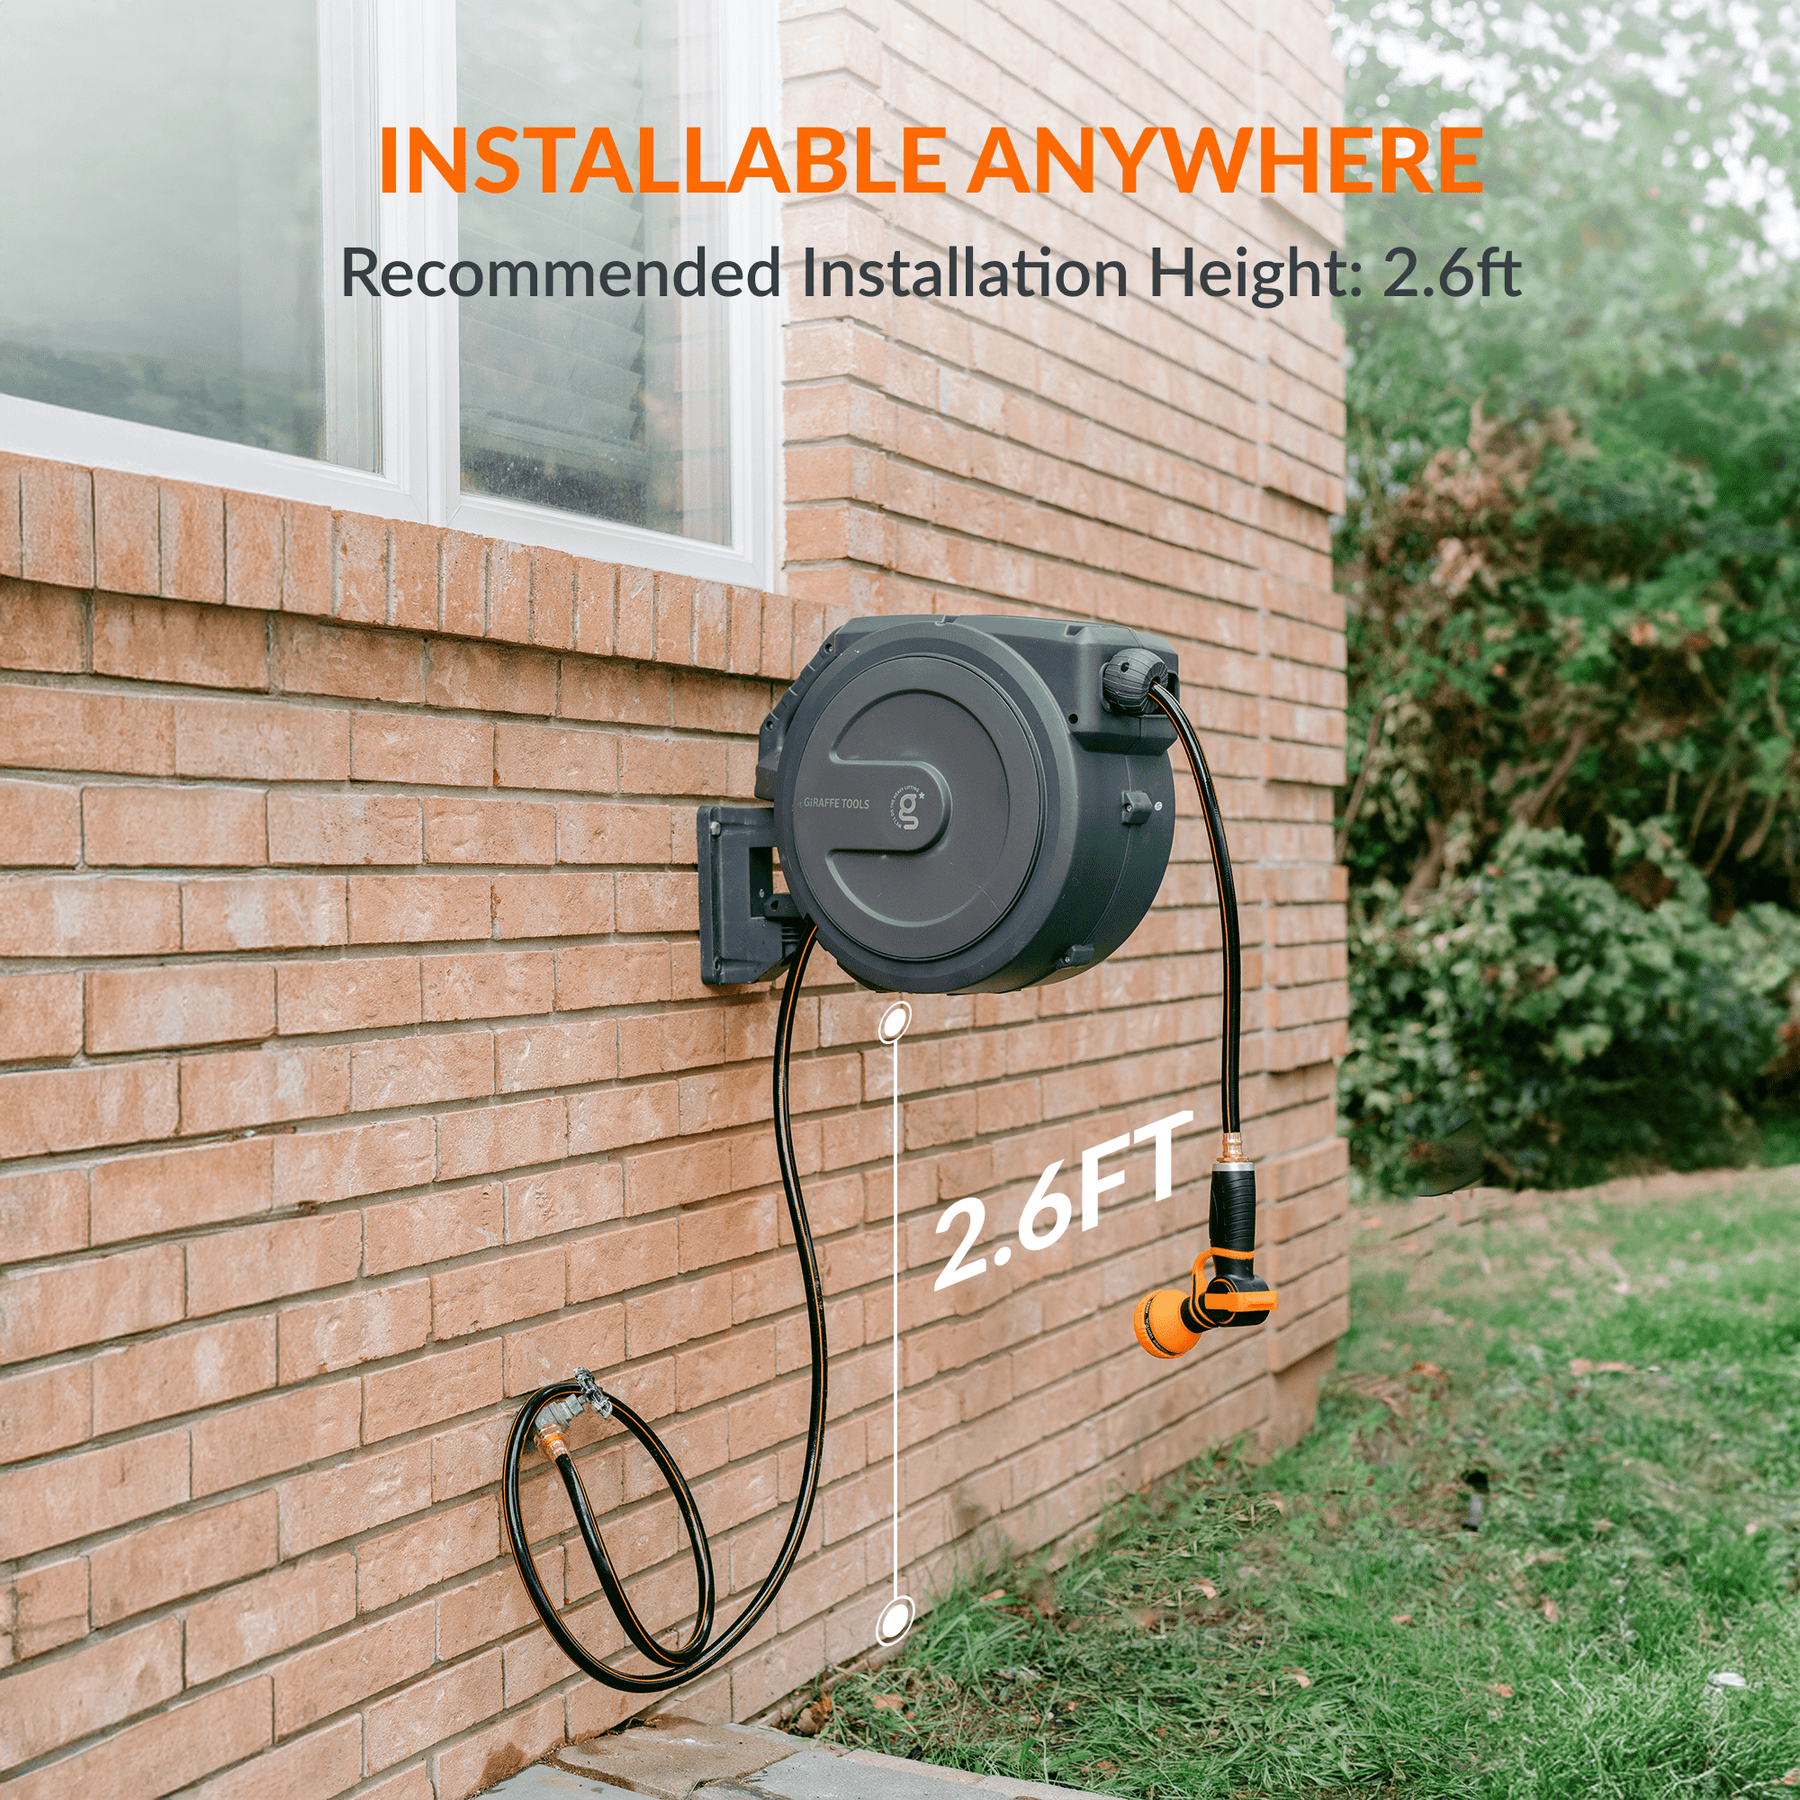 Giraffe Tool 40ft Outdoor Extension Cord, Multiple Plugs, With Safety  Cover, 16AWG/3C SJTW ETL And AW501/2 Retractable Hose Reel 1/2 x 155 ft,  Automatic Rewind System, 9 Pattern Nozzle, Dark Gray 